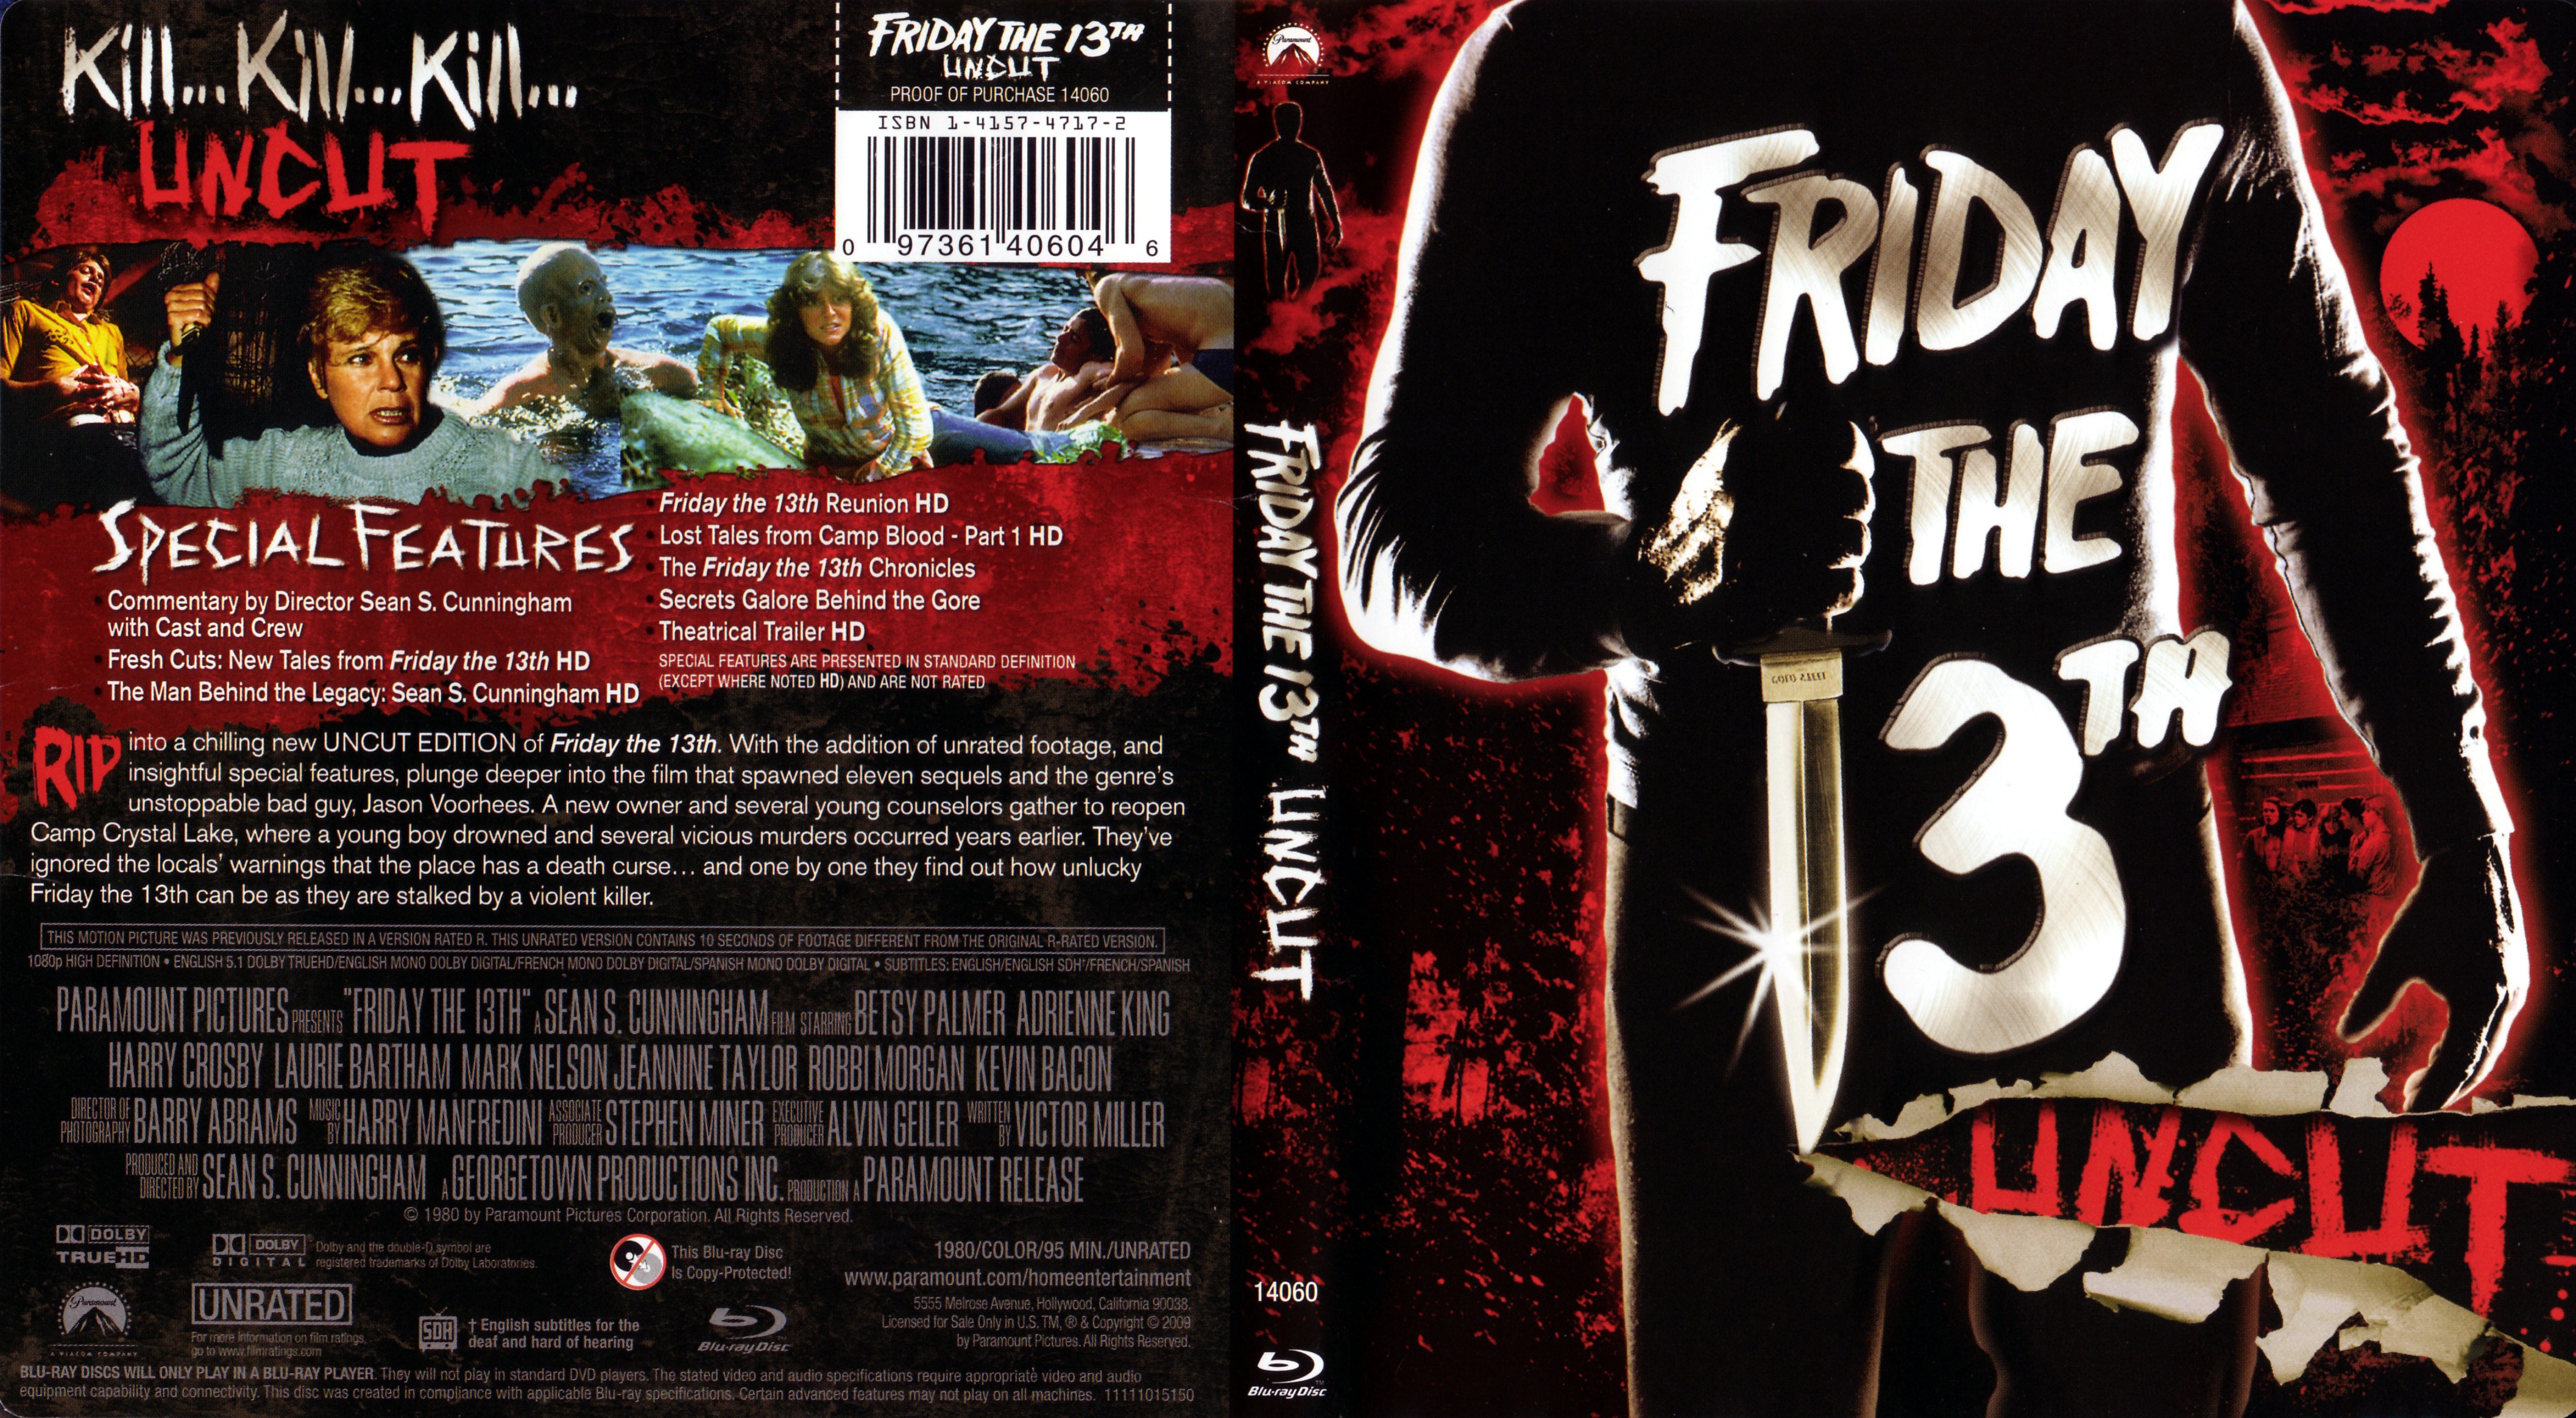 Jaquette DVD Friday the 13th uncut Zone 1 (BLU-RAY)